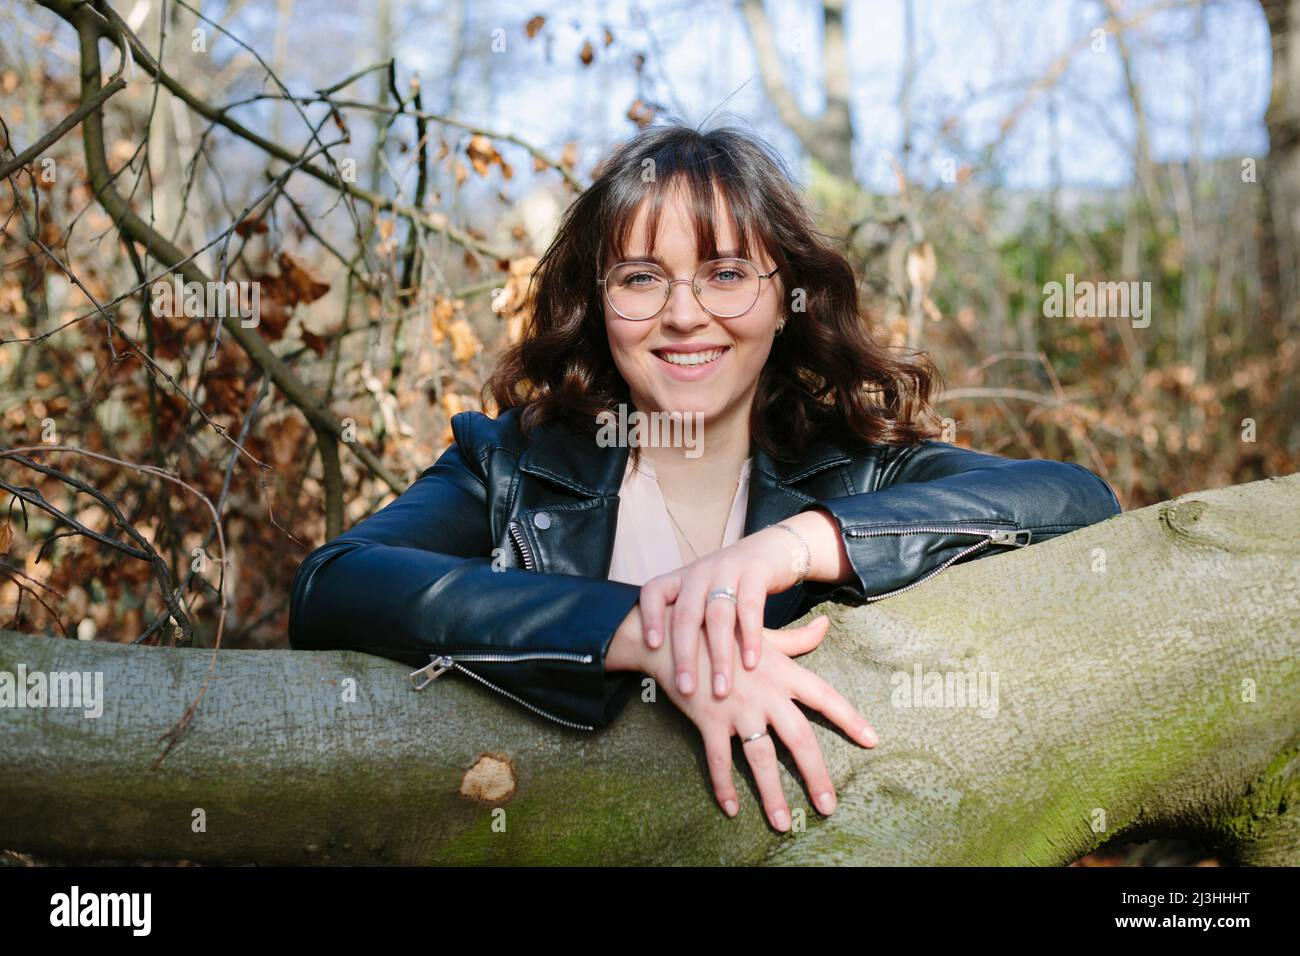 Friendly laughing woman in forest Stock Photo